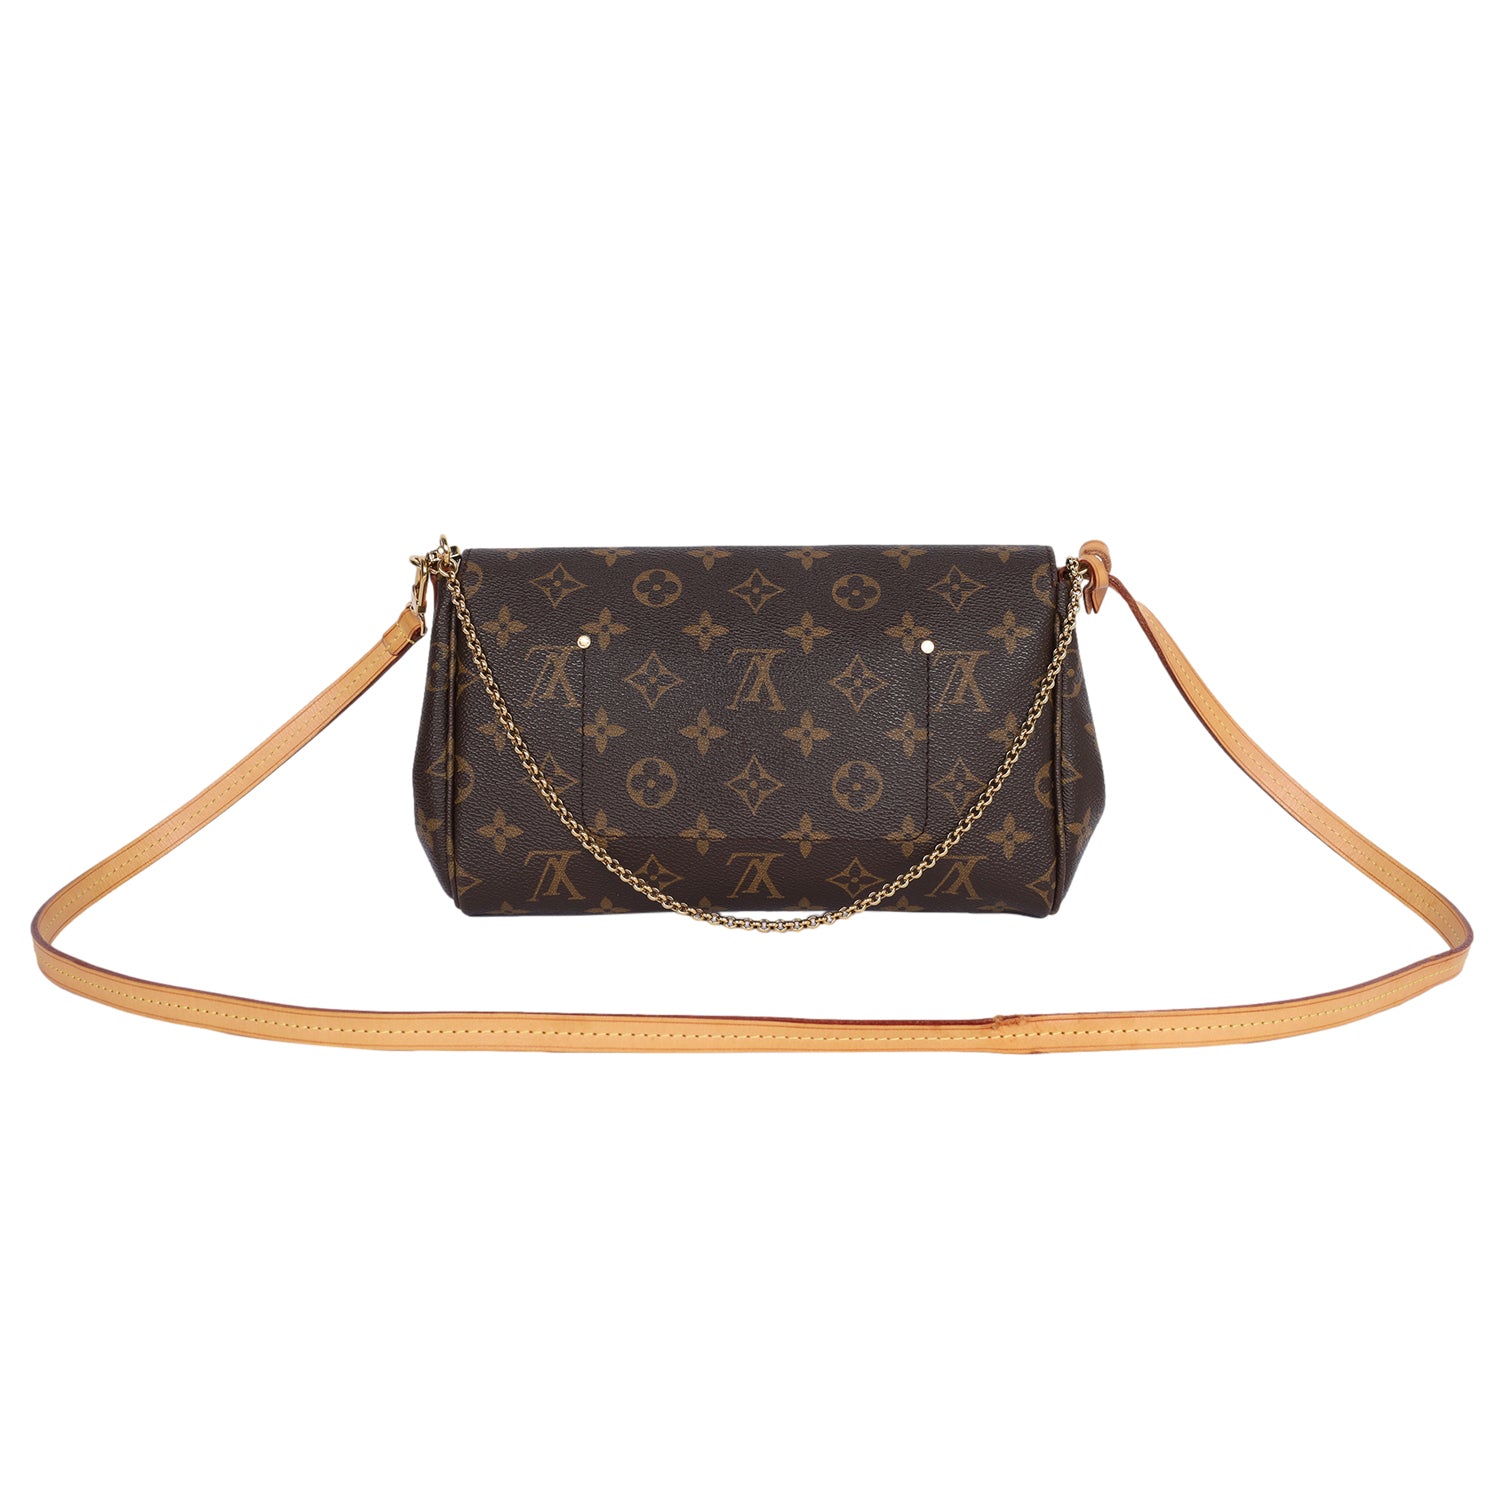 Monogram Favorite Crossbody Bag (Authentic Pre-Owned) – The Lady Bag